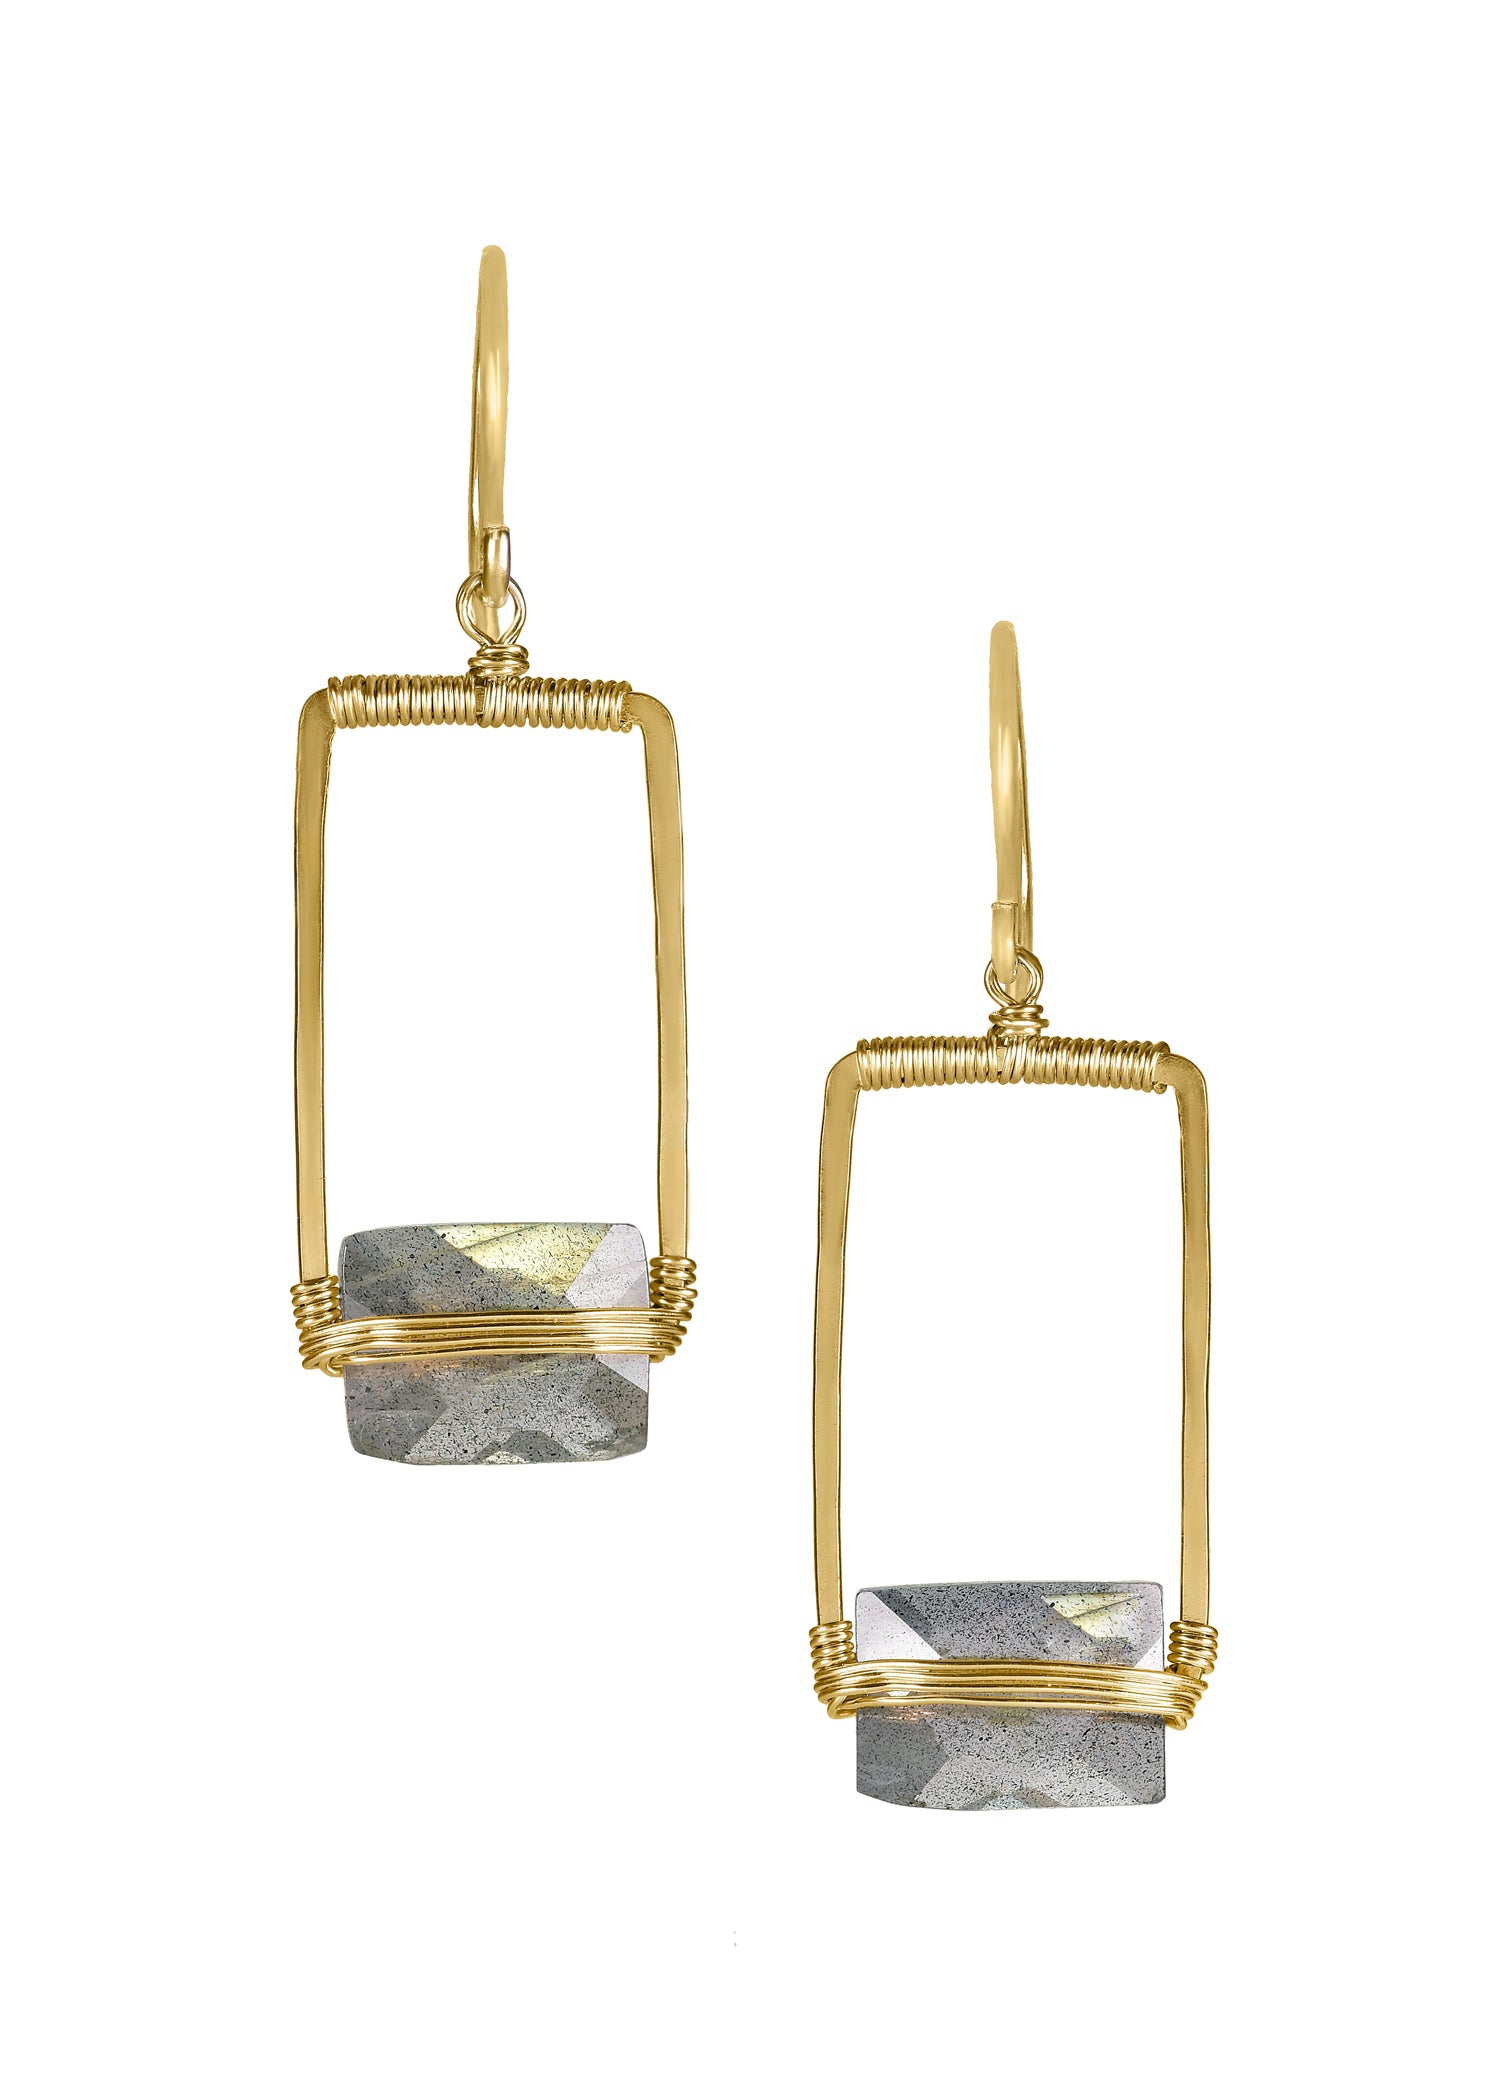 Labradorite 14k gold fill Earring measures 1-1/4" in length (including the ear wires) and 7/16" in width at the widest point Handmade in our Los Angeles studio